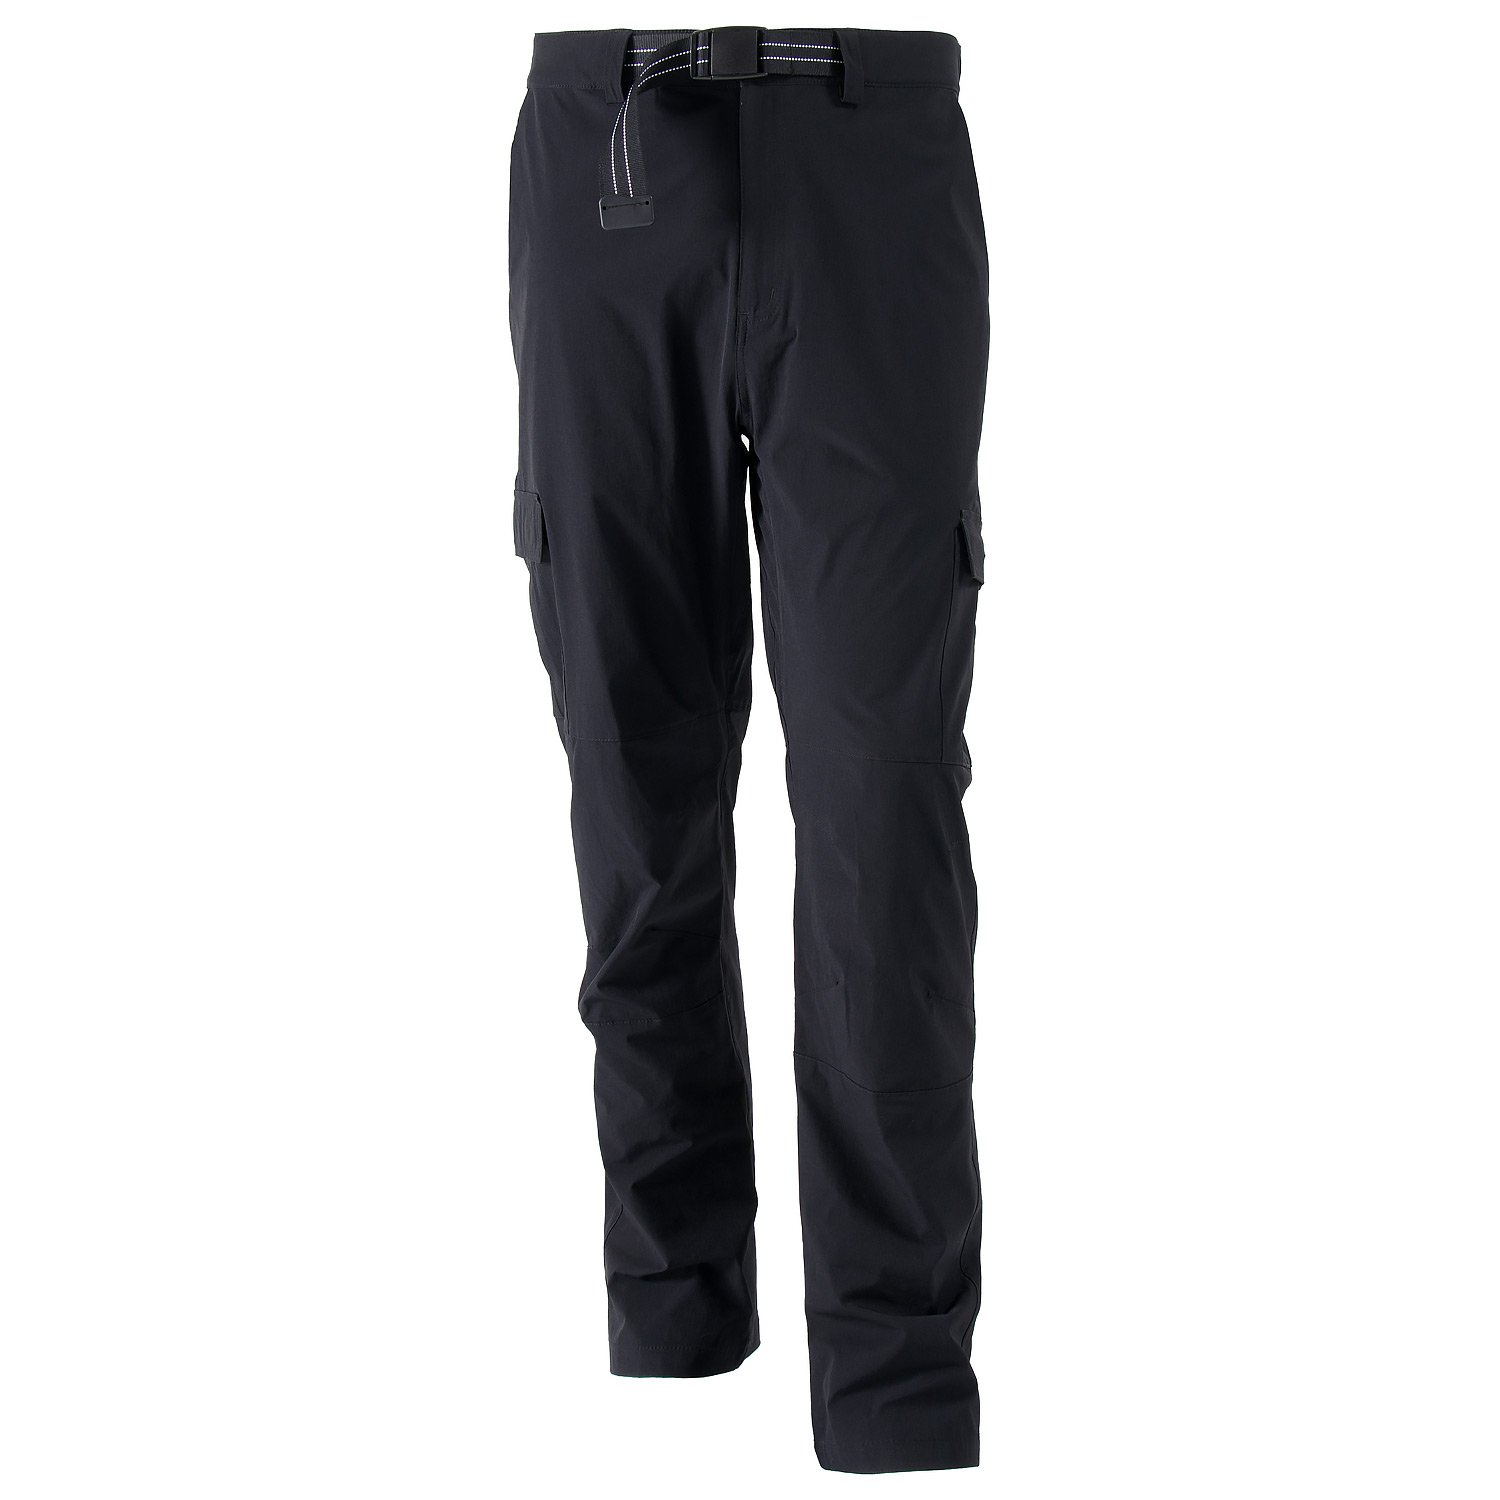 Men's Stretch Fit Hiking Pants - First Ascent